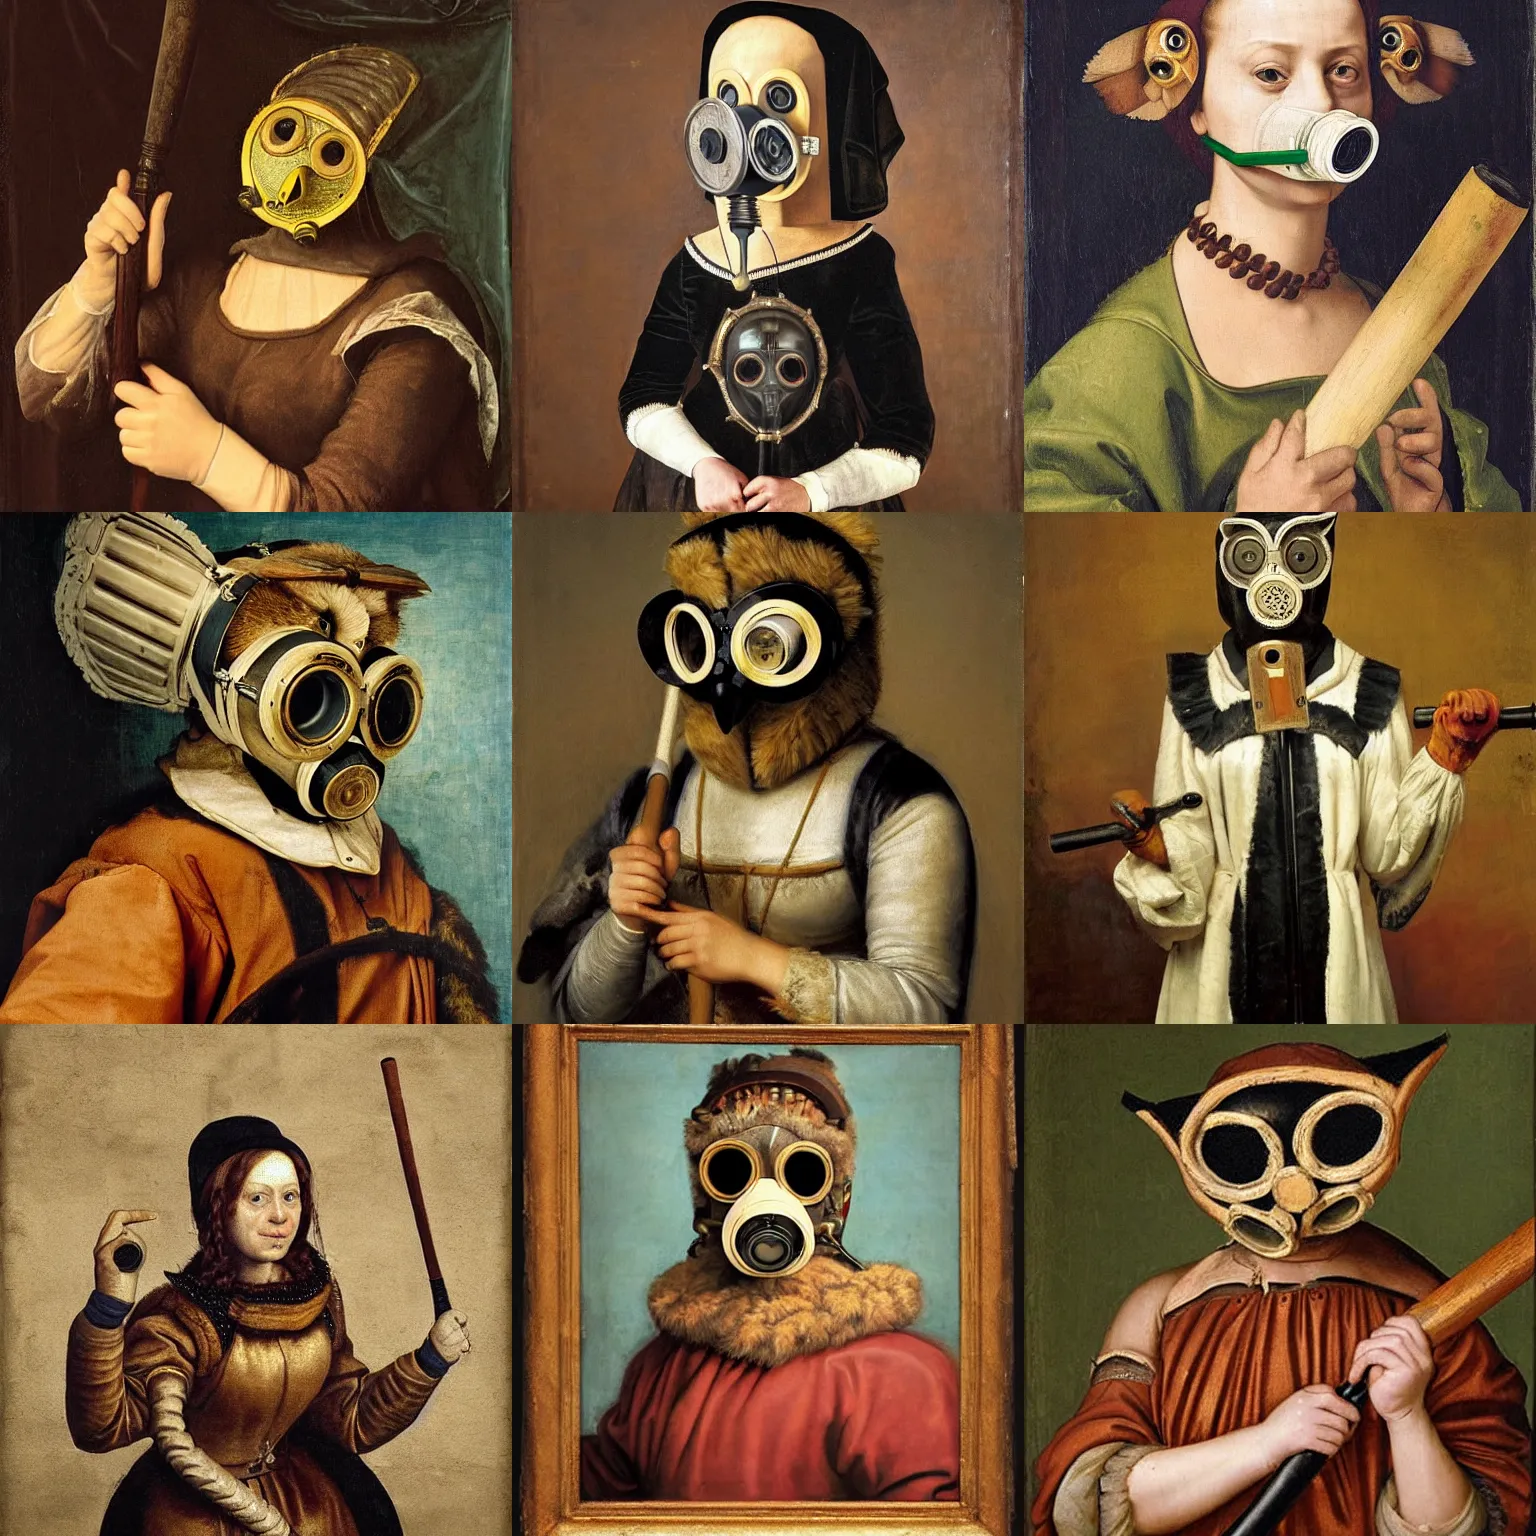 Prompt: an hd renaissance portrait painting of a woman in an owl costume mask retrofitted with a gas mask. she is wearing a jacket, and is brandishing a baseball bat in a threatening manner.